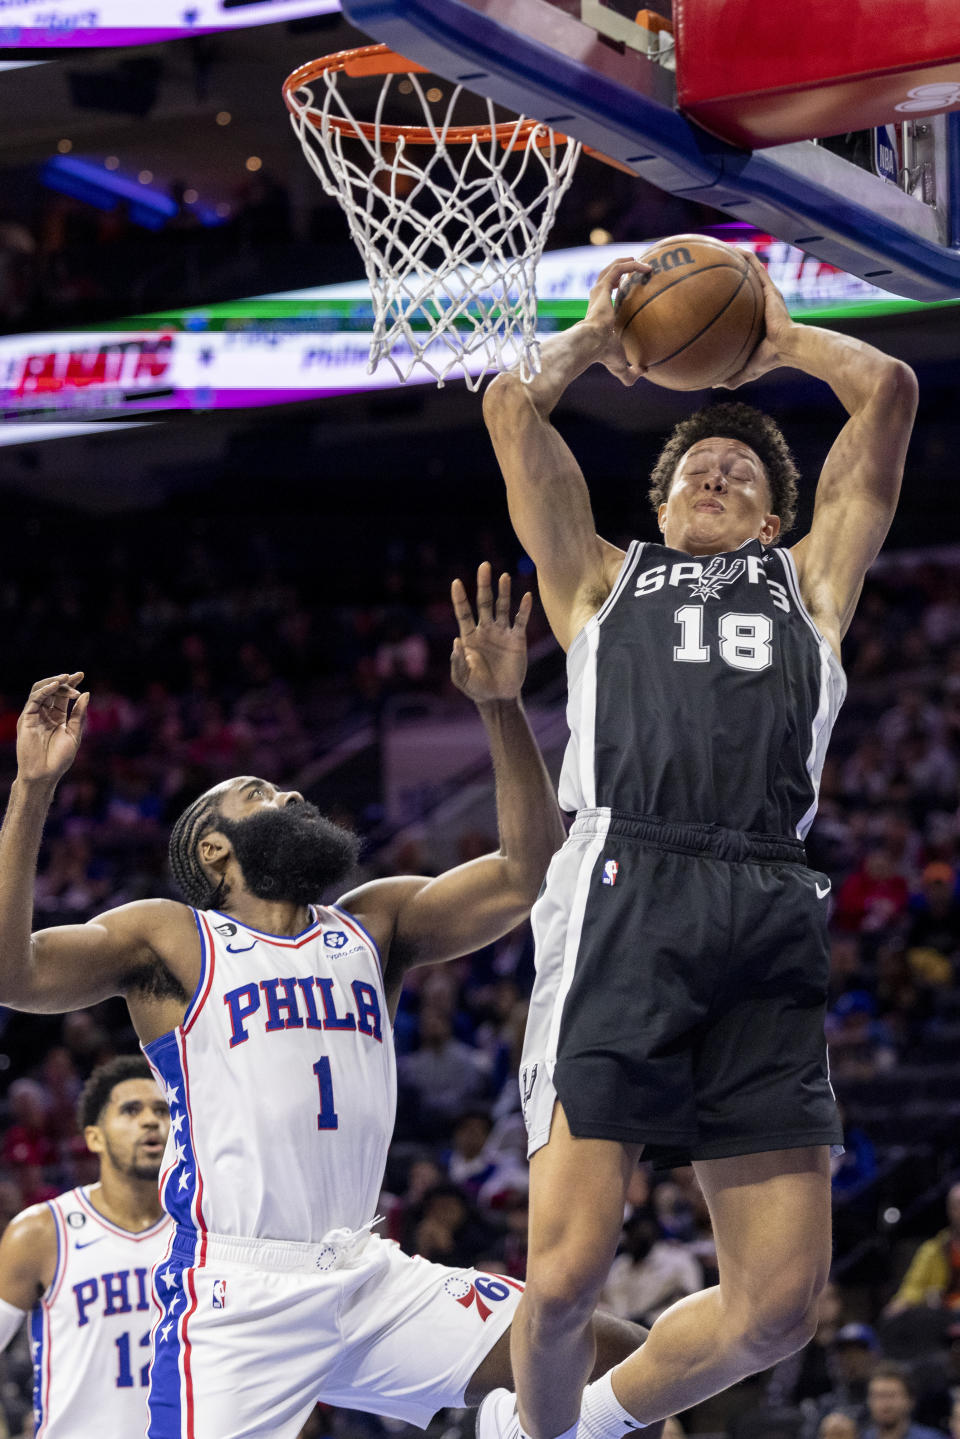 San Antonio Spurs forward Isaiah Roby (18) grabs a rebound away from Philadelphia 76ers guard James Harden (1) in the first half of an NBA basketball game, Saturday, Oct. 22, 2022, in Philadelphia. (AP Photo/Laurence Kesterson)